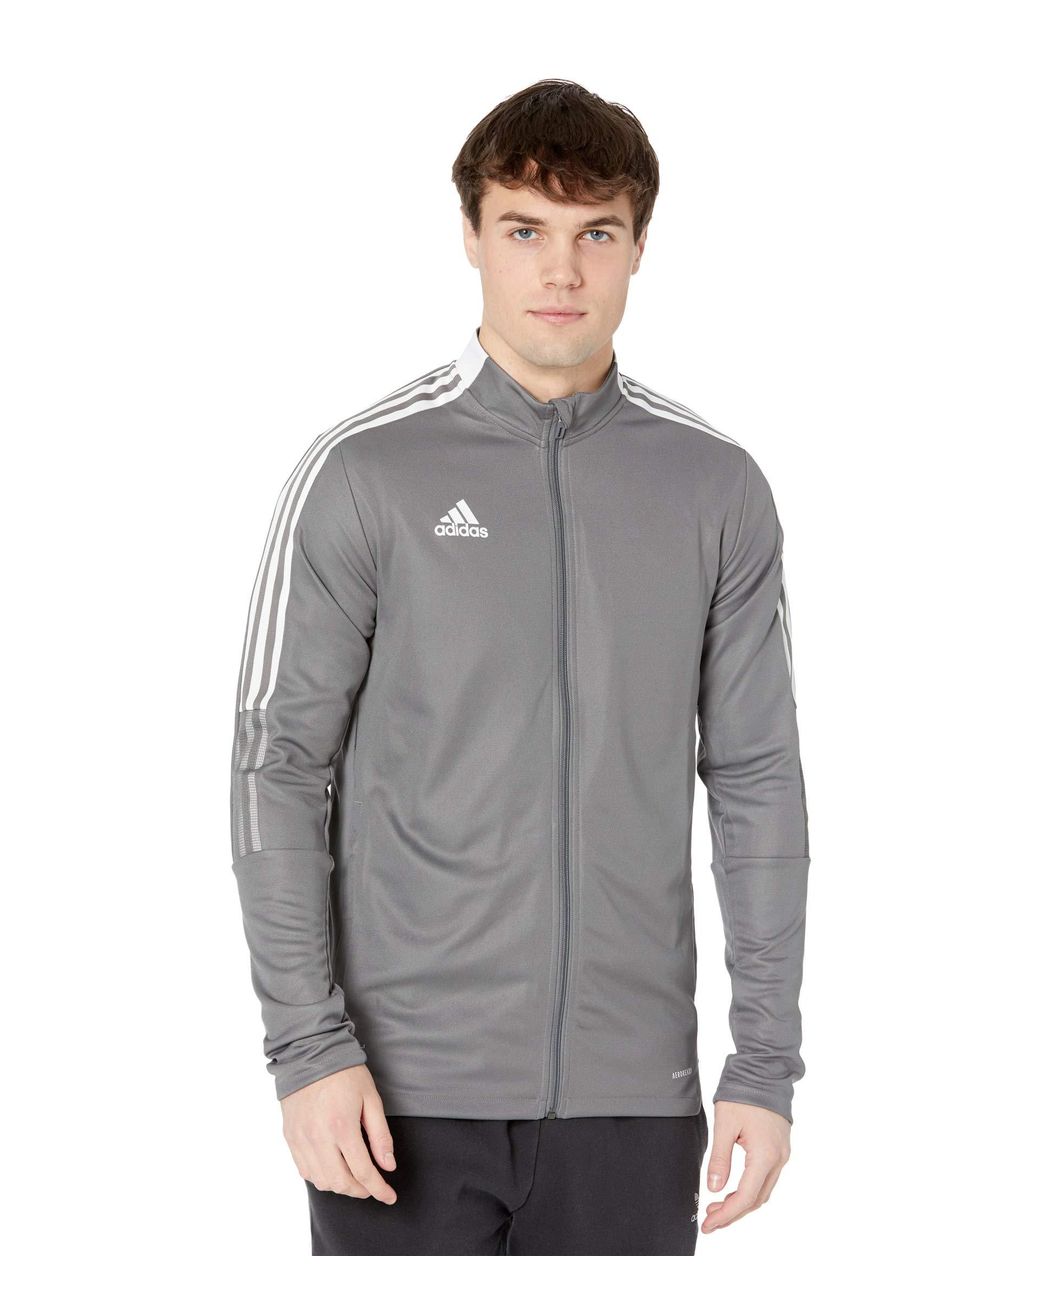 adidas Synthetic Tiro 21 Track Jacket in Gray for Men - Lyst